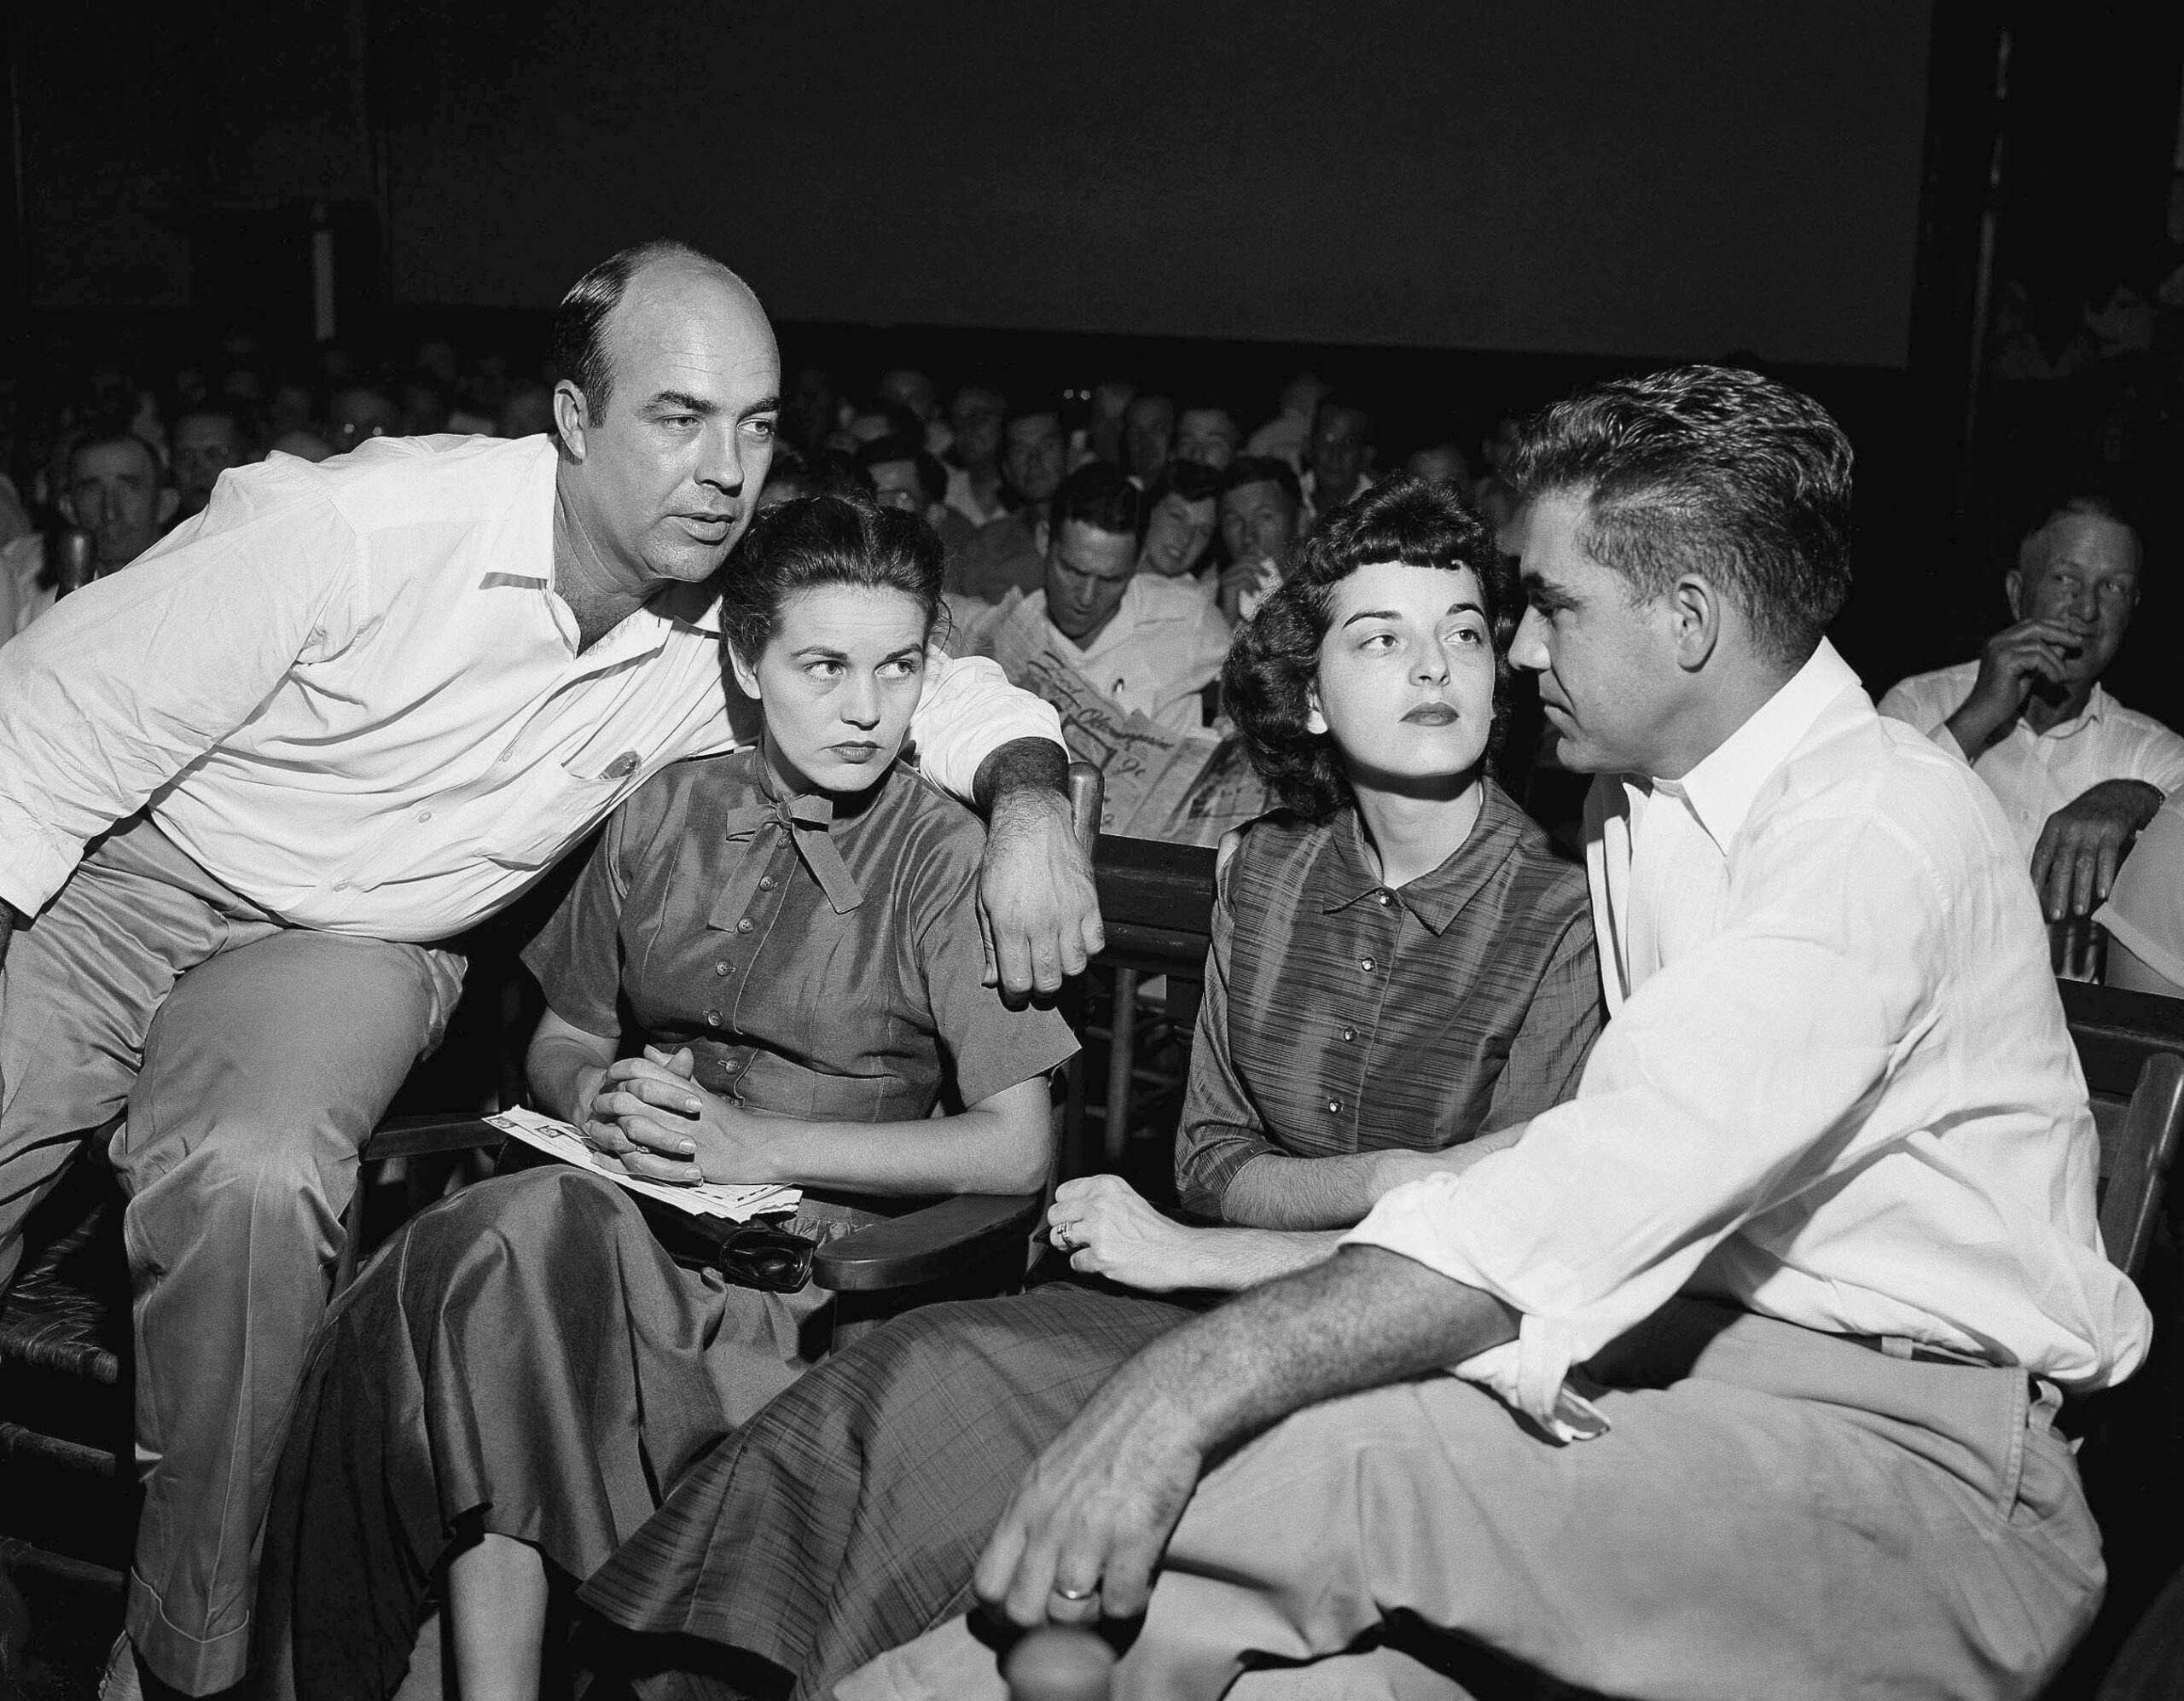 FILE - In this Sept. 23, 1955, file photo, J.W. Milam, left, his wife, second from left, Roy Bryant, far right, and his wife, Carolyn Bryant, sit together in a courtroom in Sumner, Miss. Bryant and his half-brother Milam were charged with murder but acquitted in the kidnapping and torture slaying of 14-year-old black teen Emmett Till in 1955 after he allegedly whistled at Carolyn Bryant. A team searching the basement of a Mississippi courthouse for evidence about the lynching of Black teenager Emmett Till has found the unserved warrant in June 2022 charging a white woman in his kidnapping in 1955, and relatives of the victim want authorities to finally arrest her nearly 70 years later. (AP Photo, File)